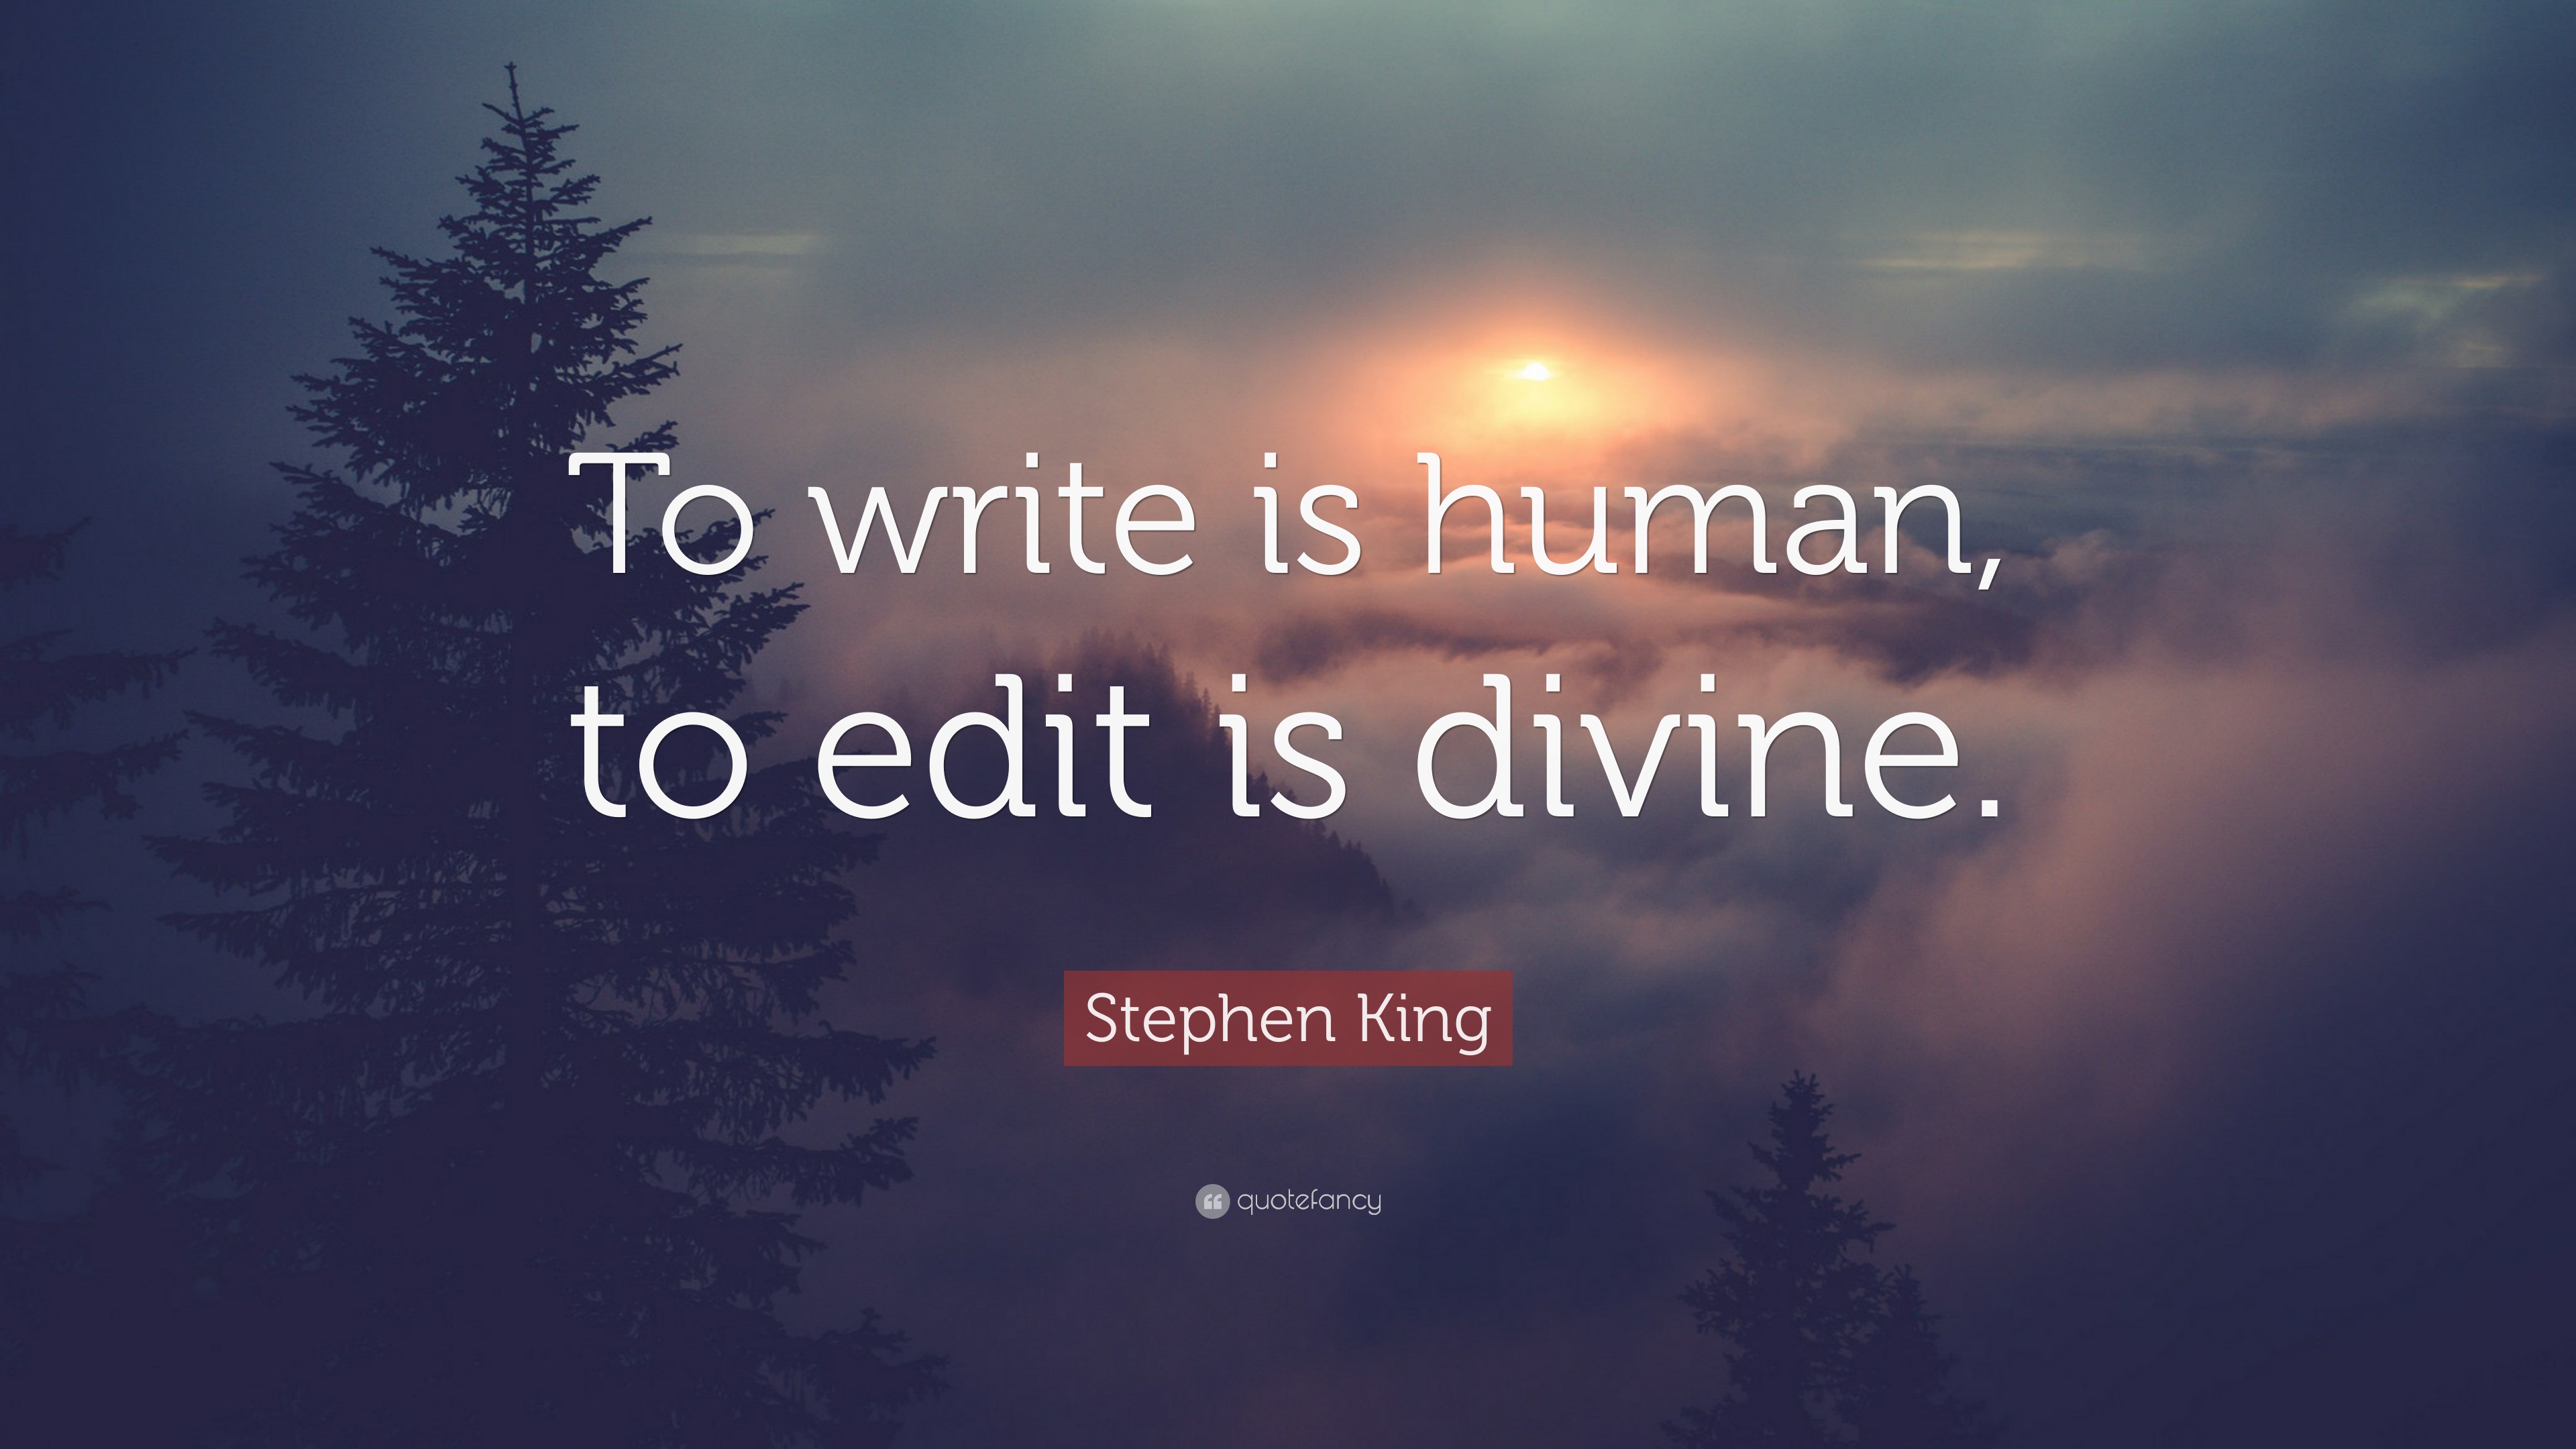 Stephen King Quote: “To write is human, to edit is divine.”